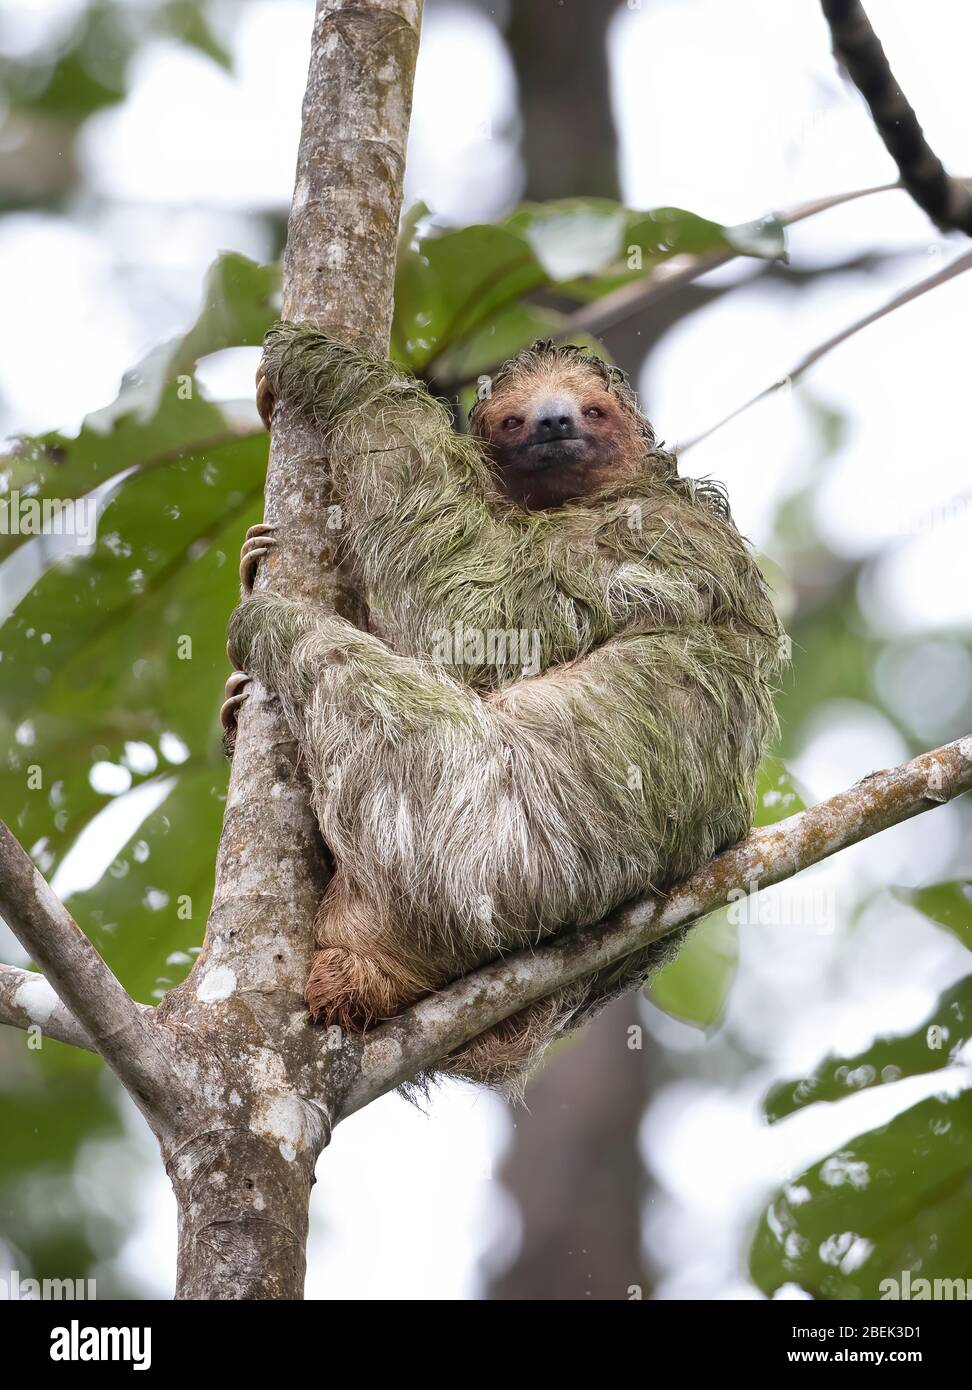 Three-toed sloth (Bradypus) sitting in a tree in the tropical jungles of  Costa Rica Stock Photo - Alamy